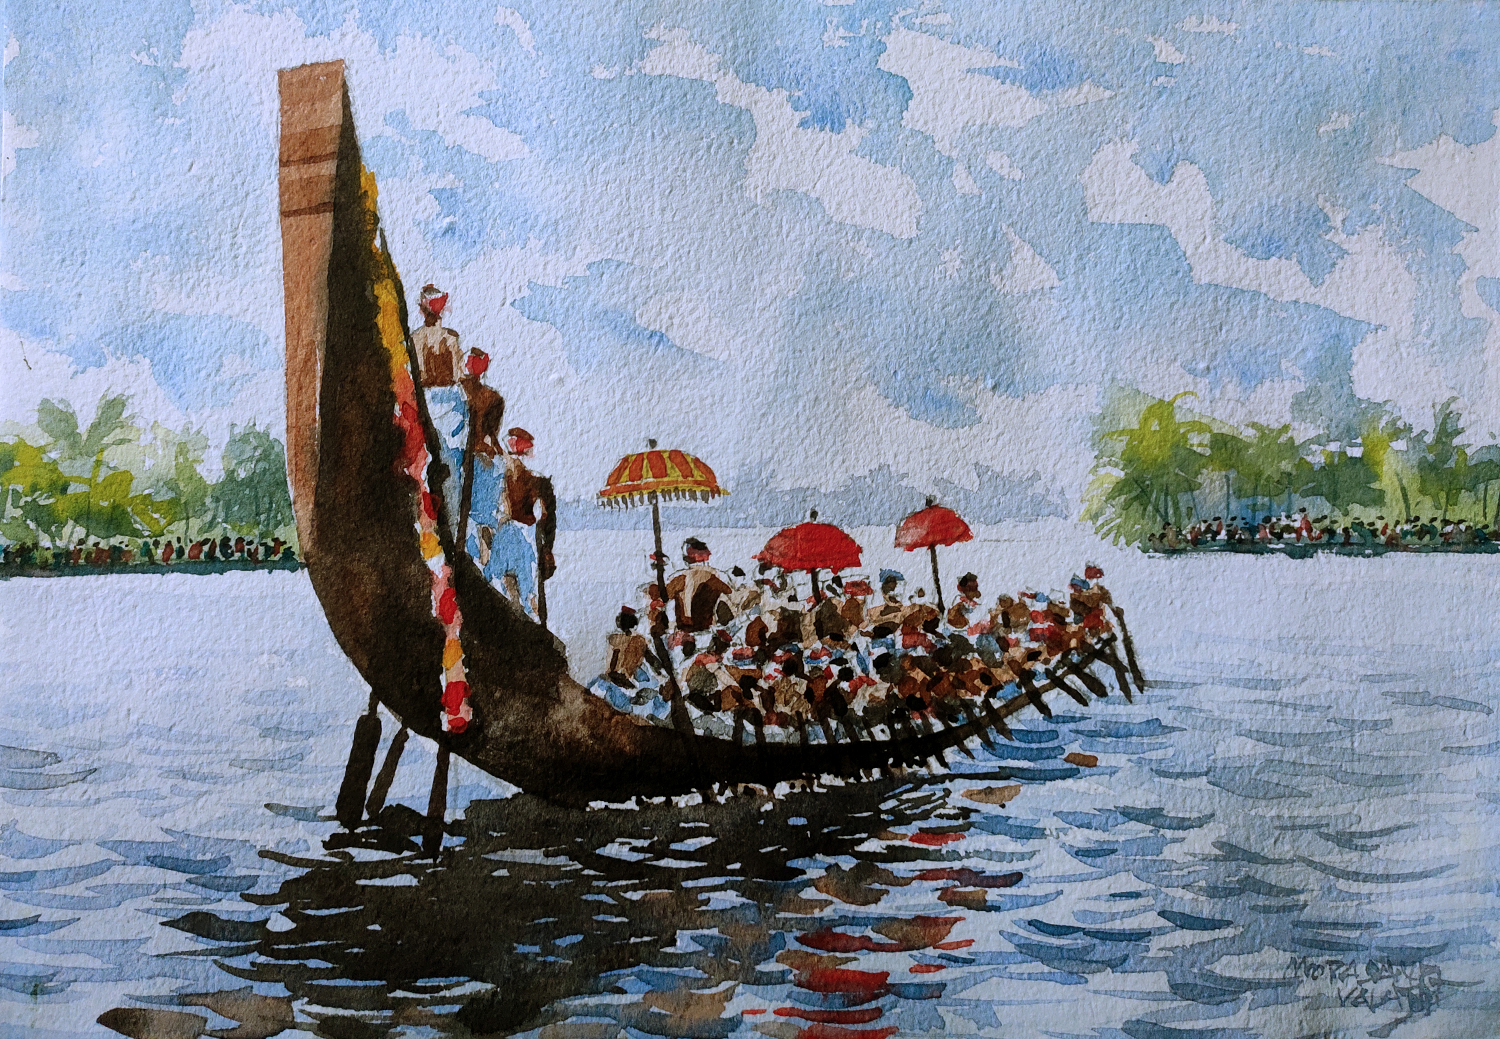 Watercolor painting on the sporty festival of Kerala, boat race.